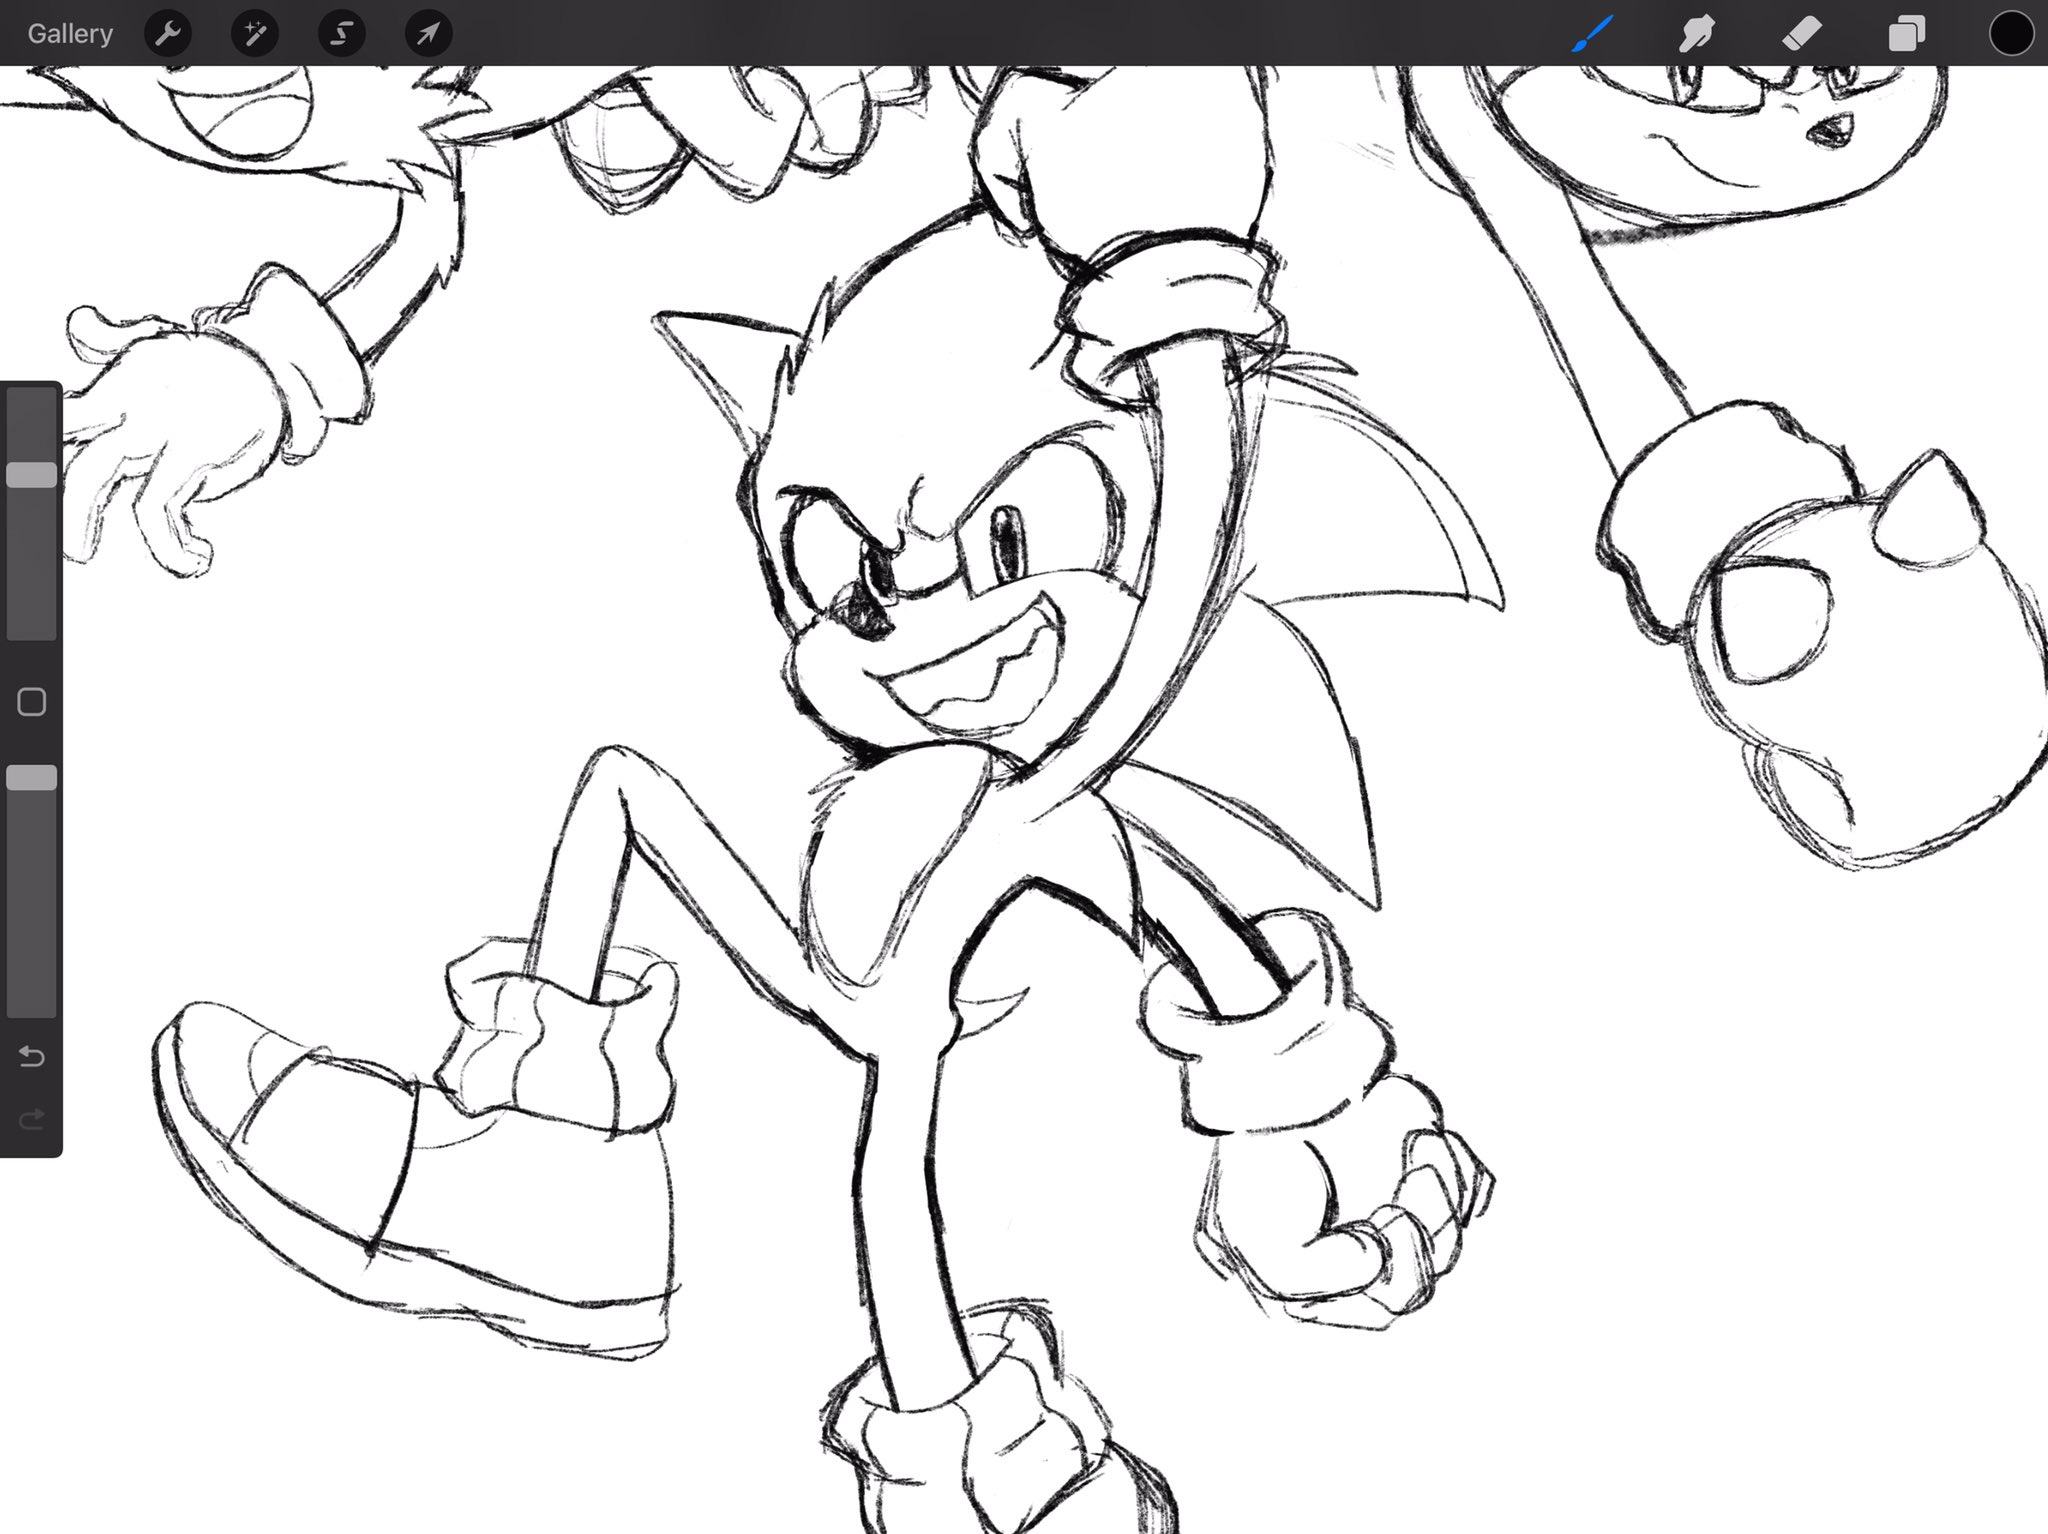 Âðgigi starling gaminggoru ðâ on x currently working on my sonic the hedgehog drawing i just love this movies rendition of the characters ð ð the full drawing should be